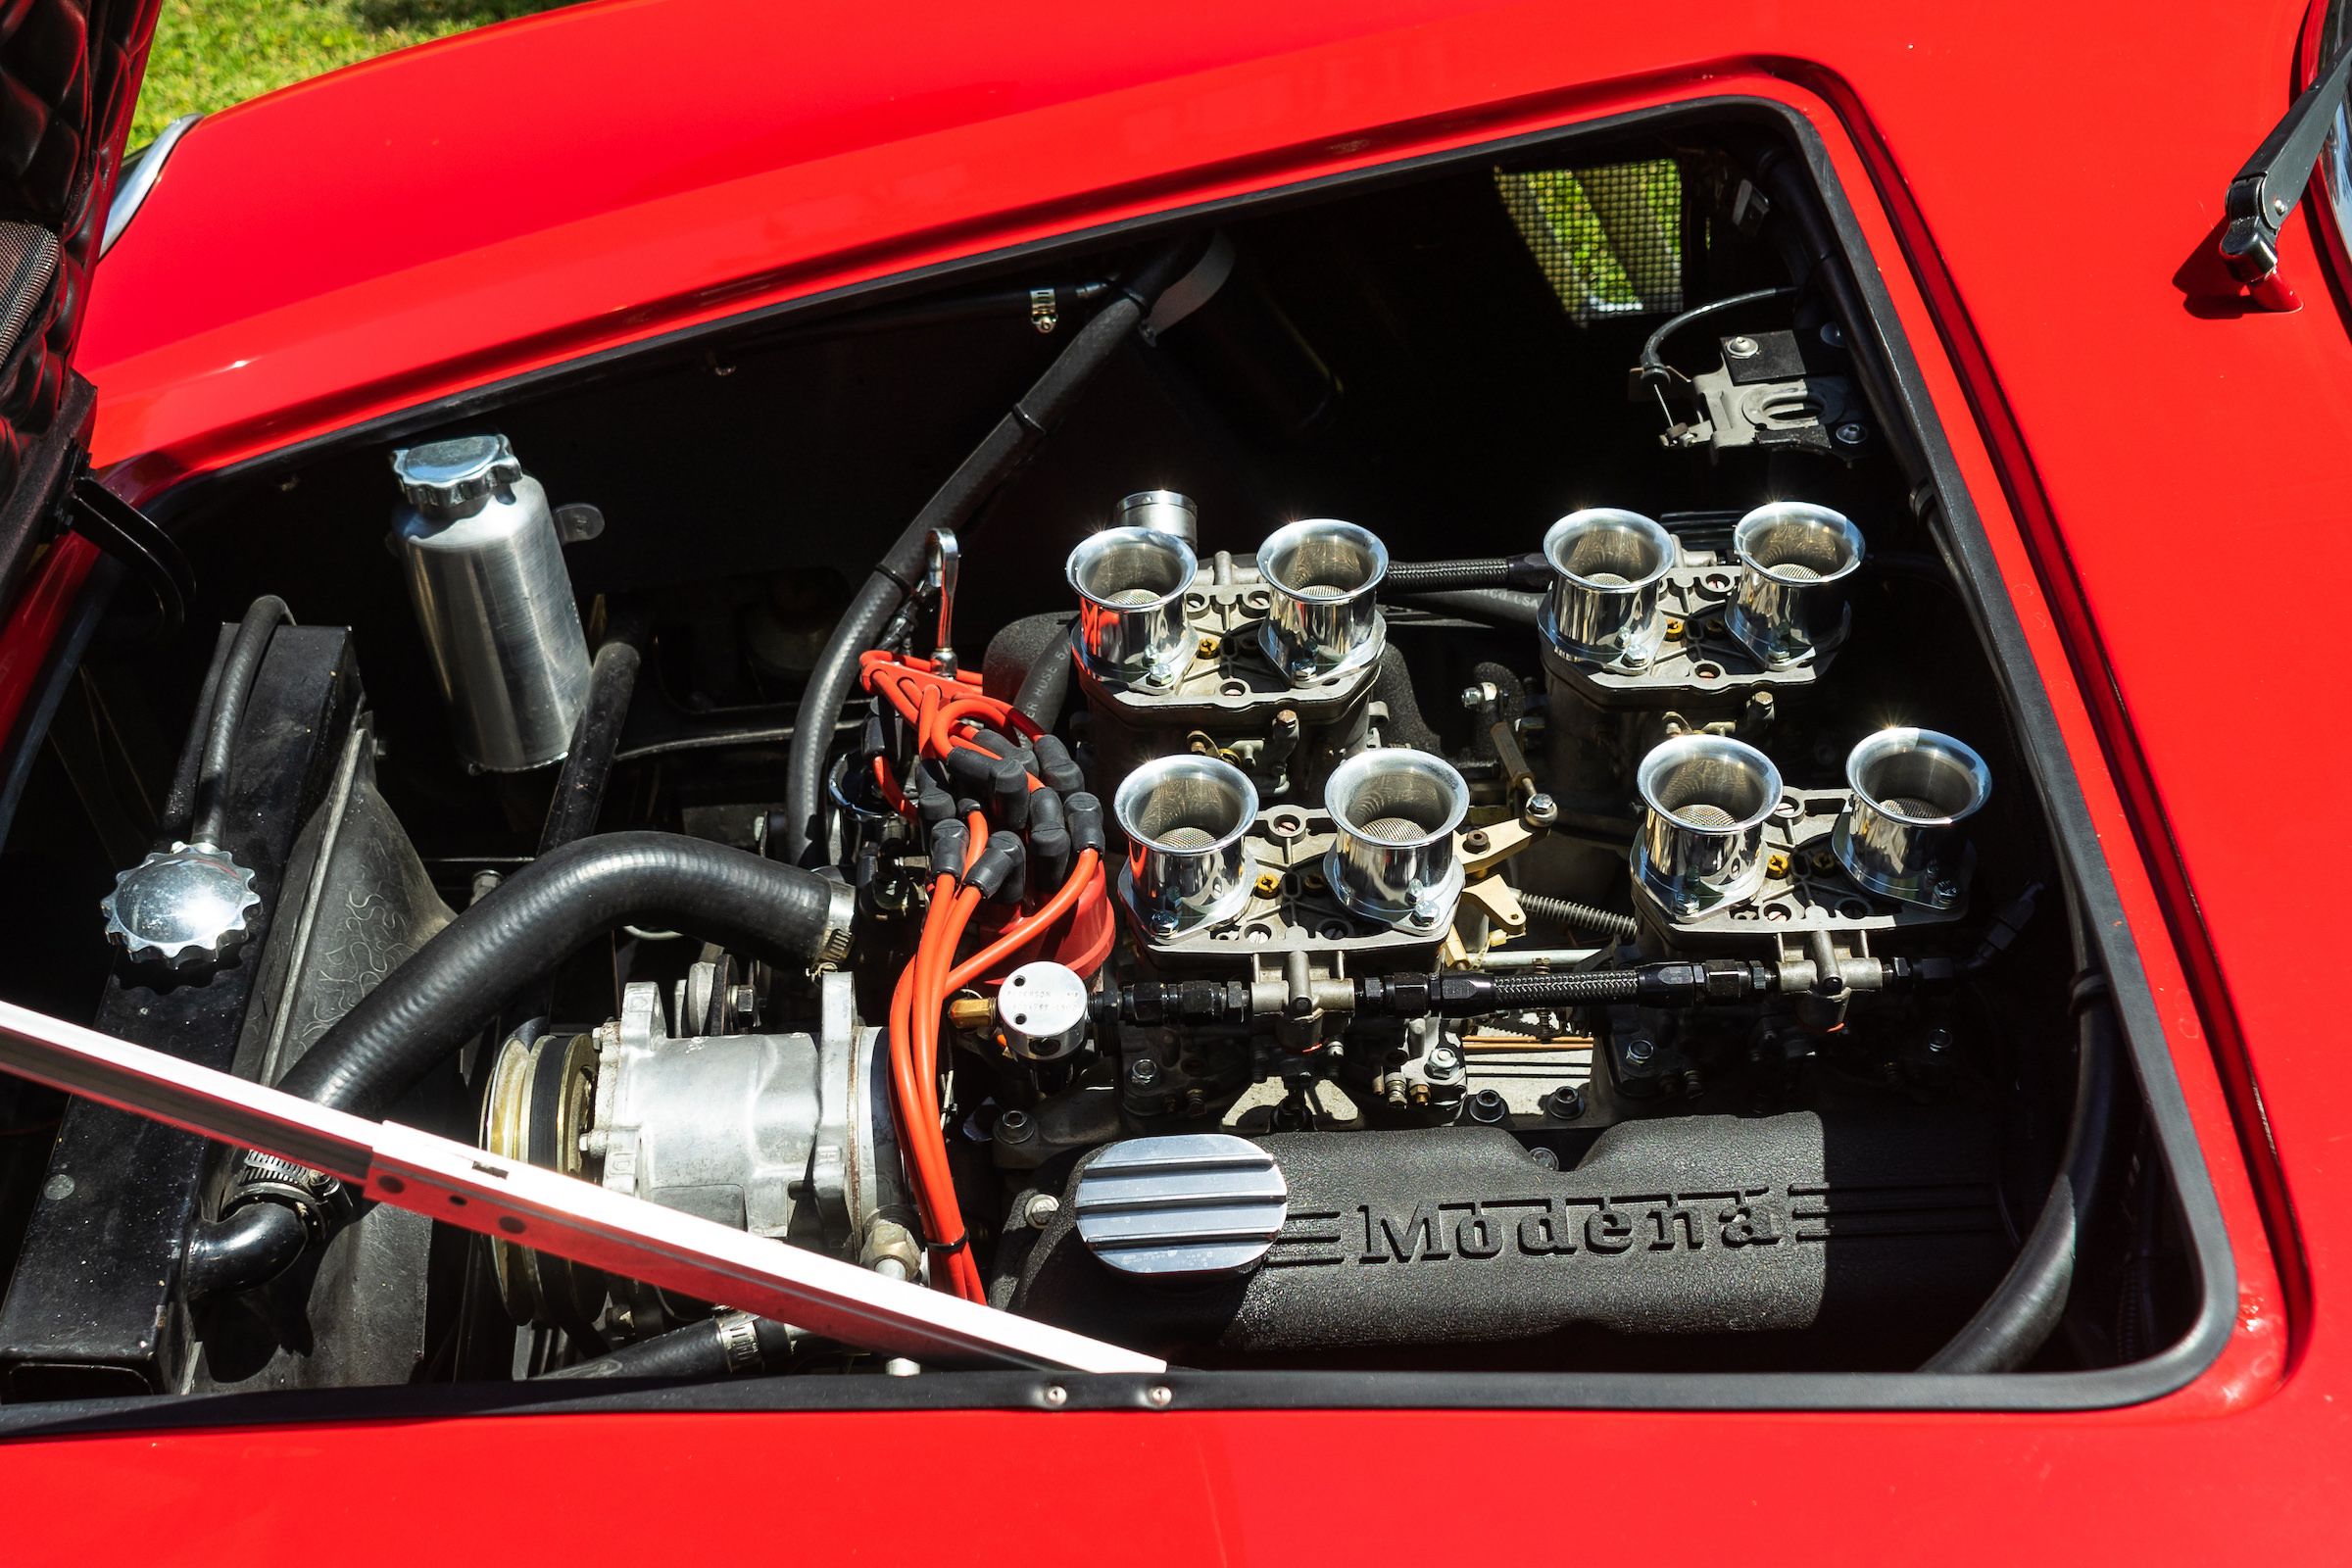 A glimpse into the inside of the Modena GT Spyder, the car used in Ferris Bueller's Day Off.